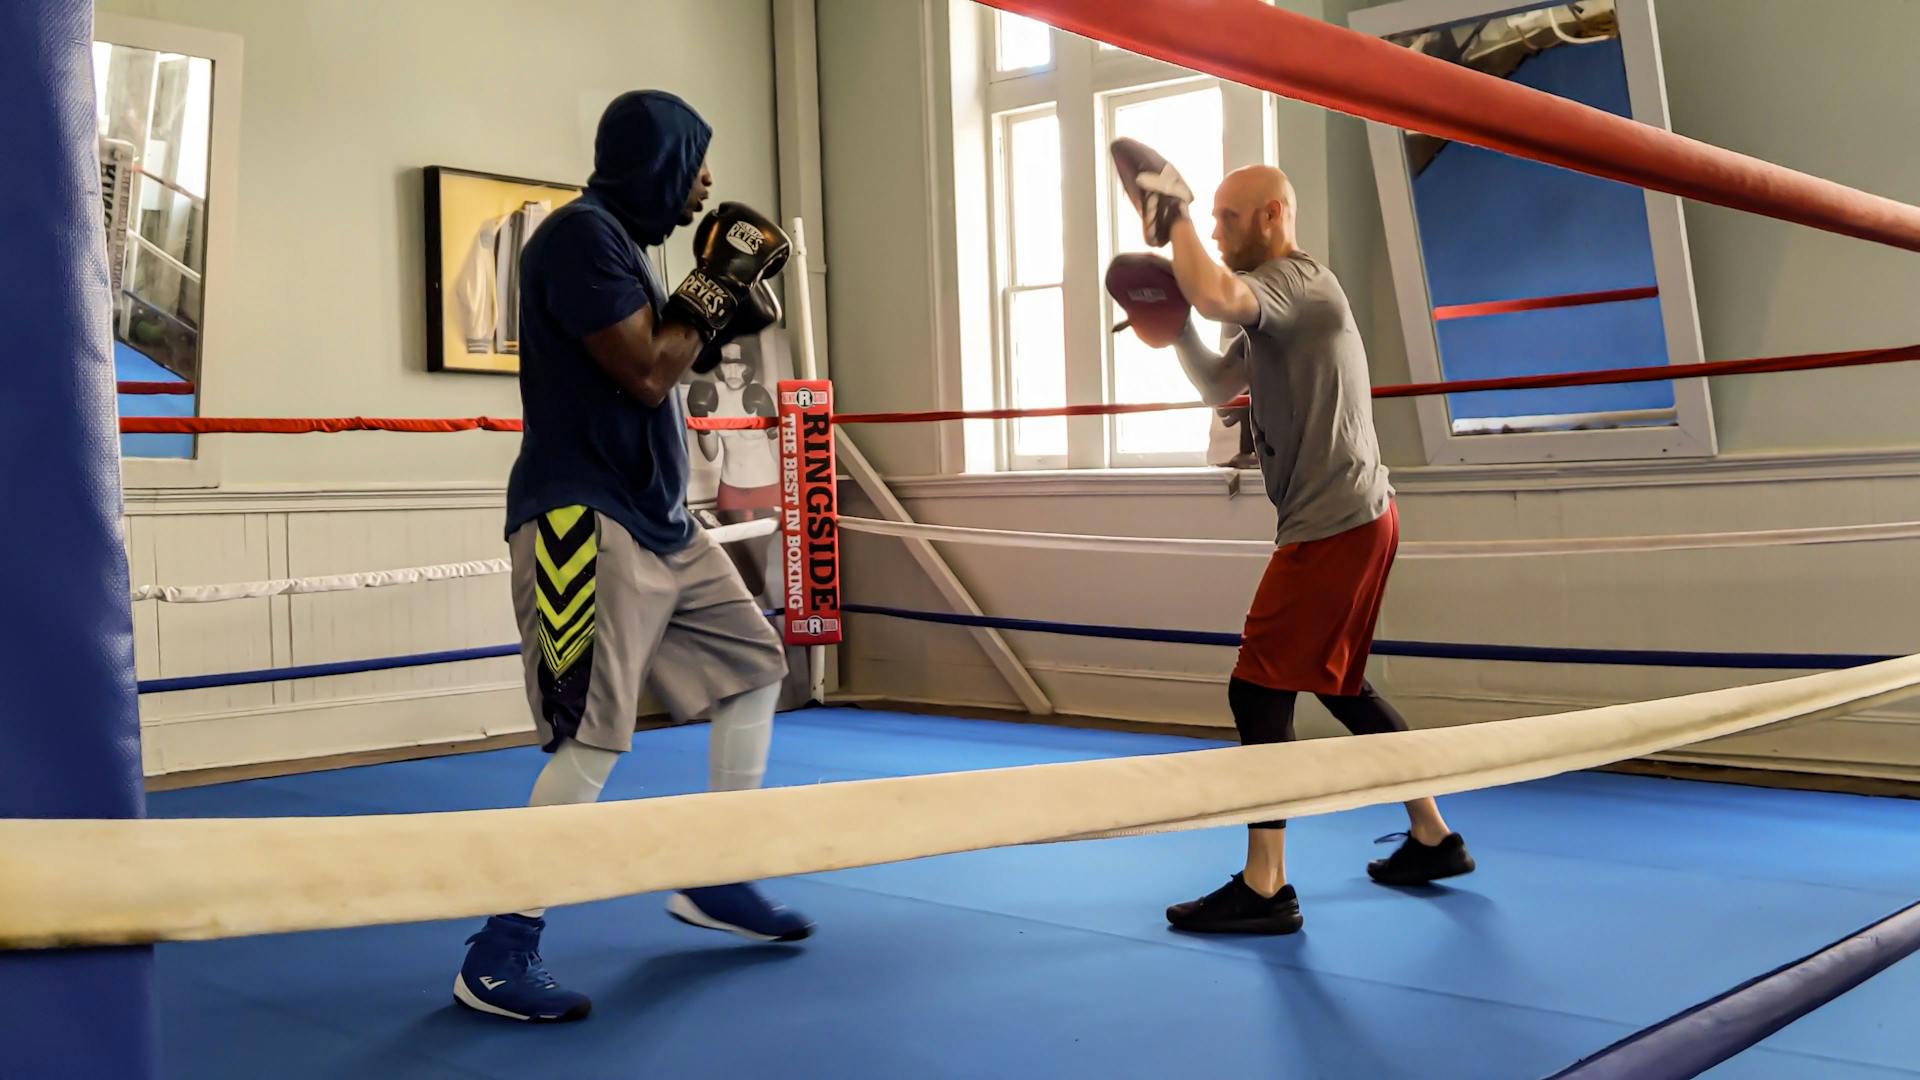 /fitness/Boxing/new orleans athletic club-spar.jpg